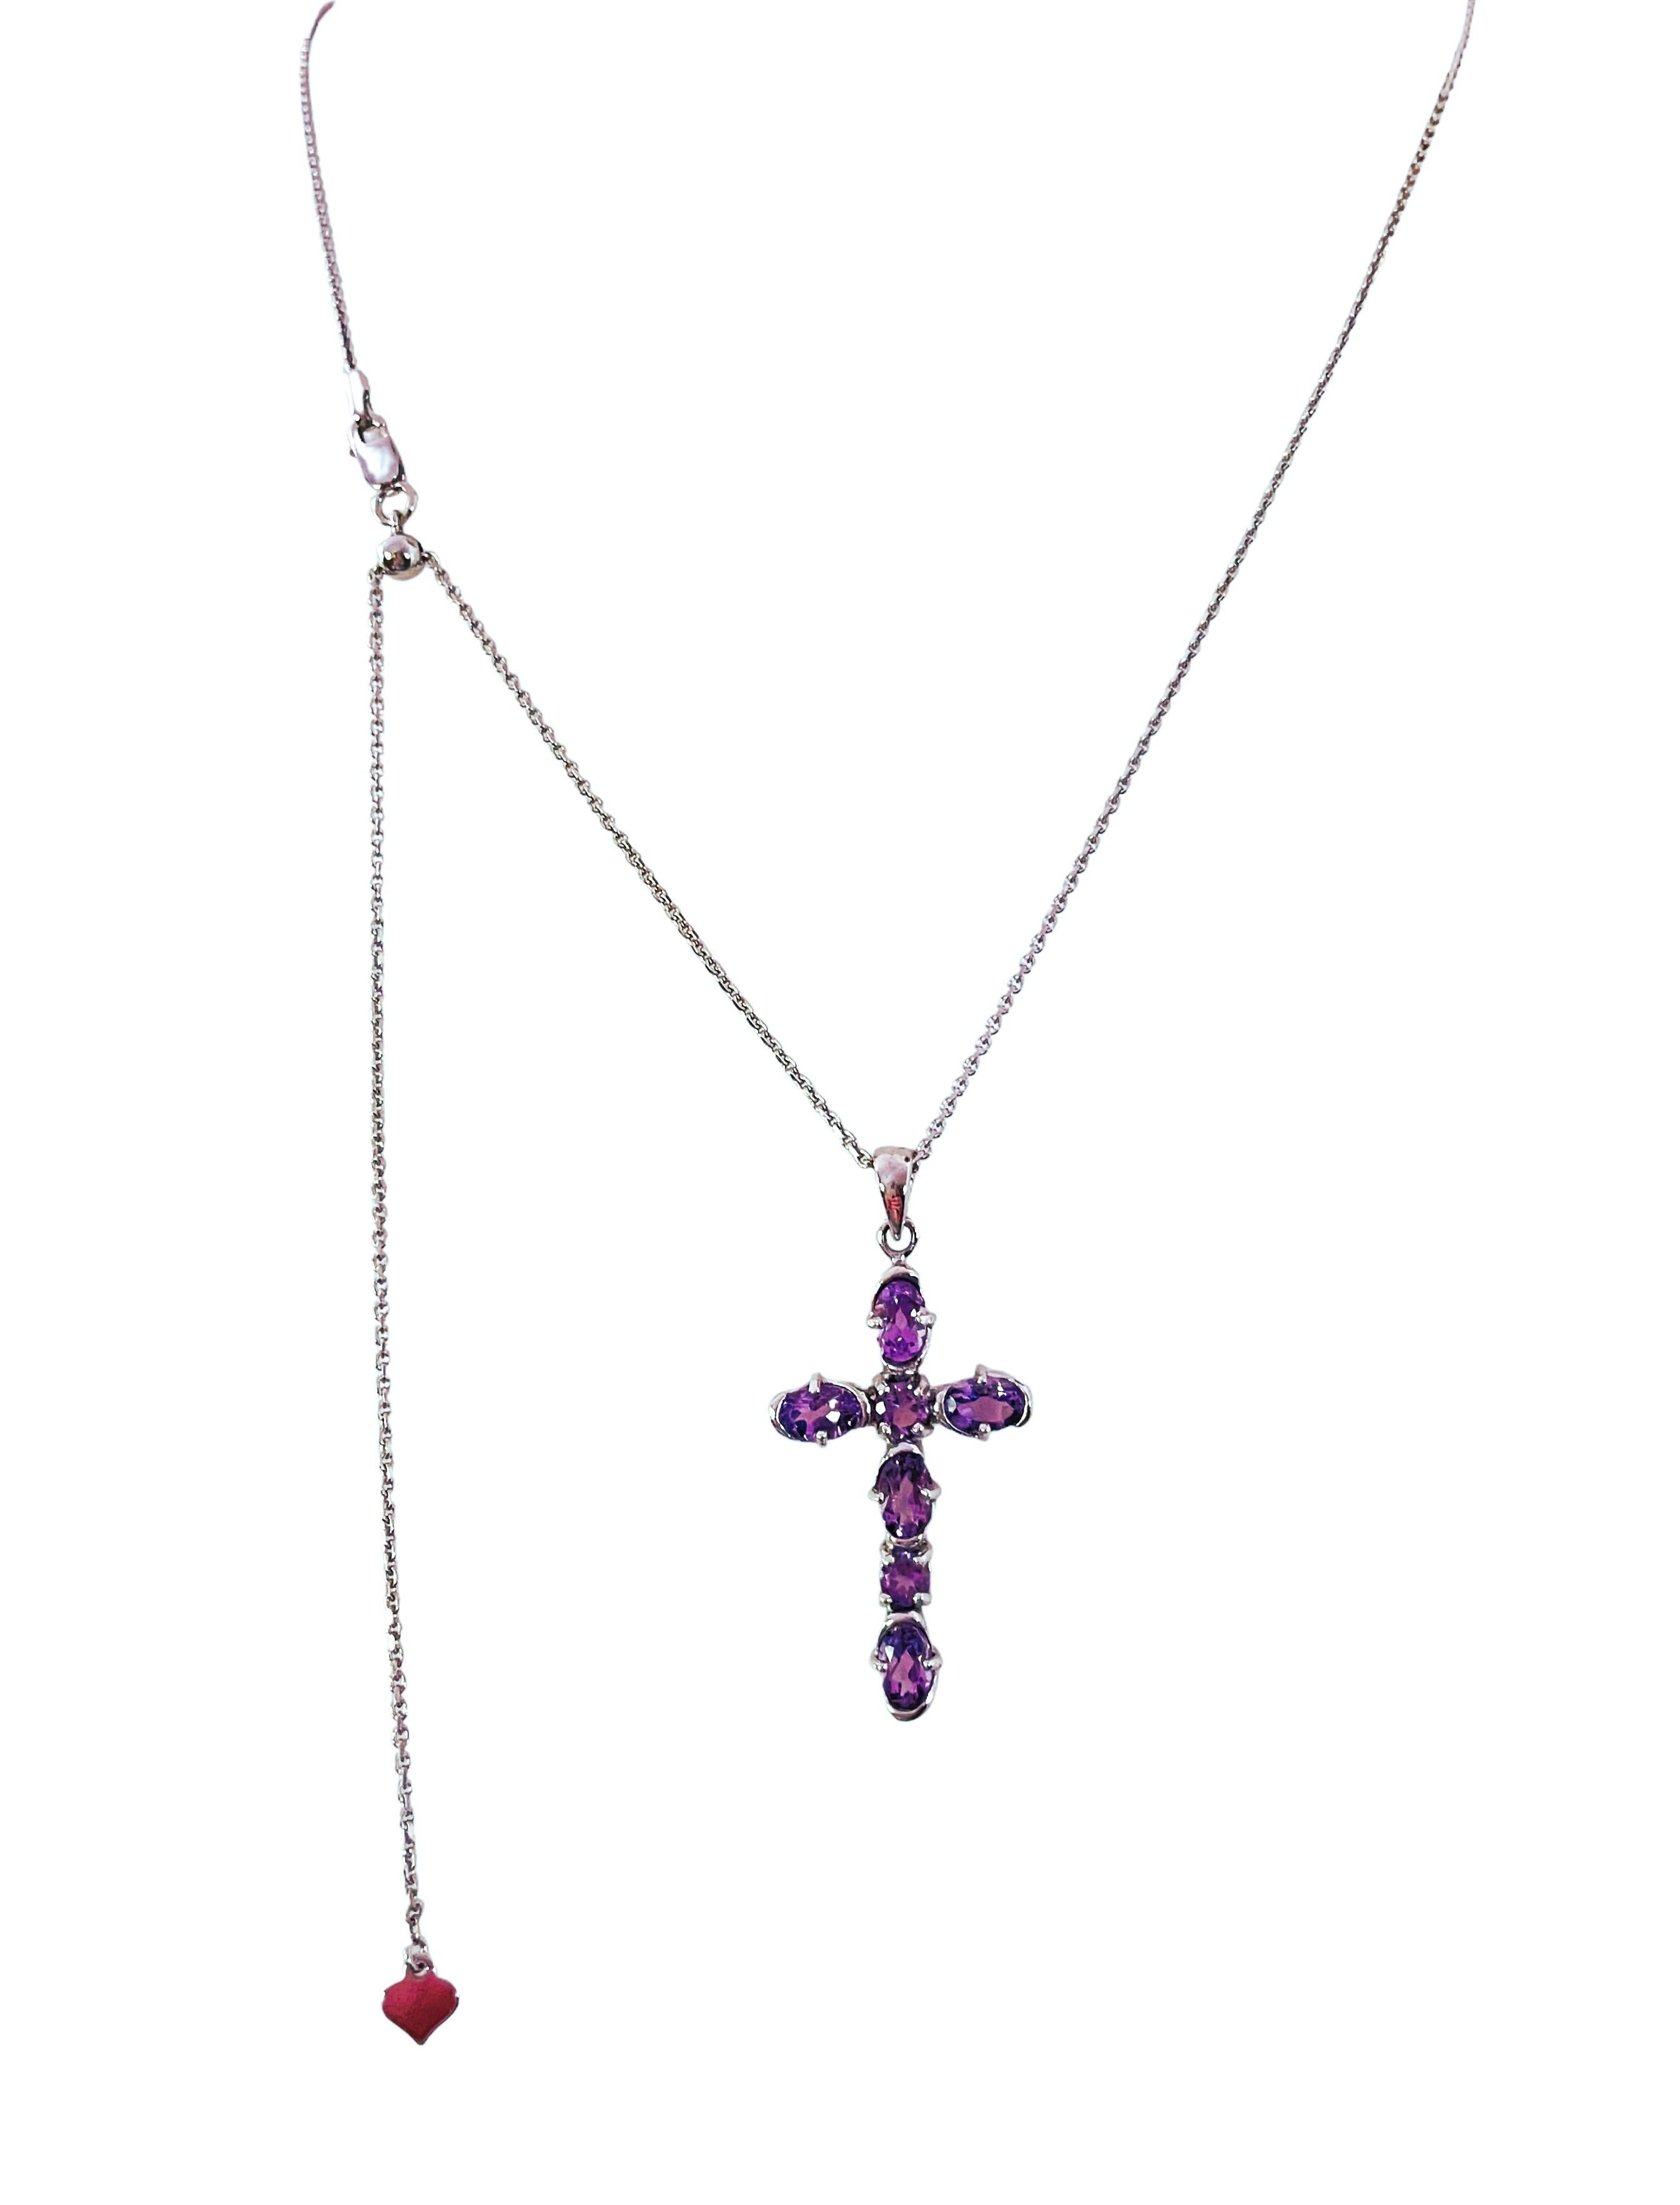 Oval Cut New Amethyst Sterling Silver Cross Necklace with Adjustable Chain For Sale